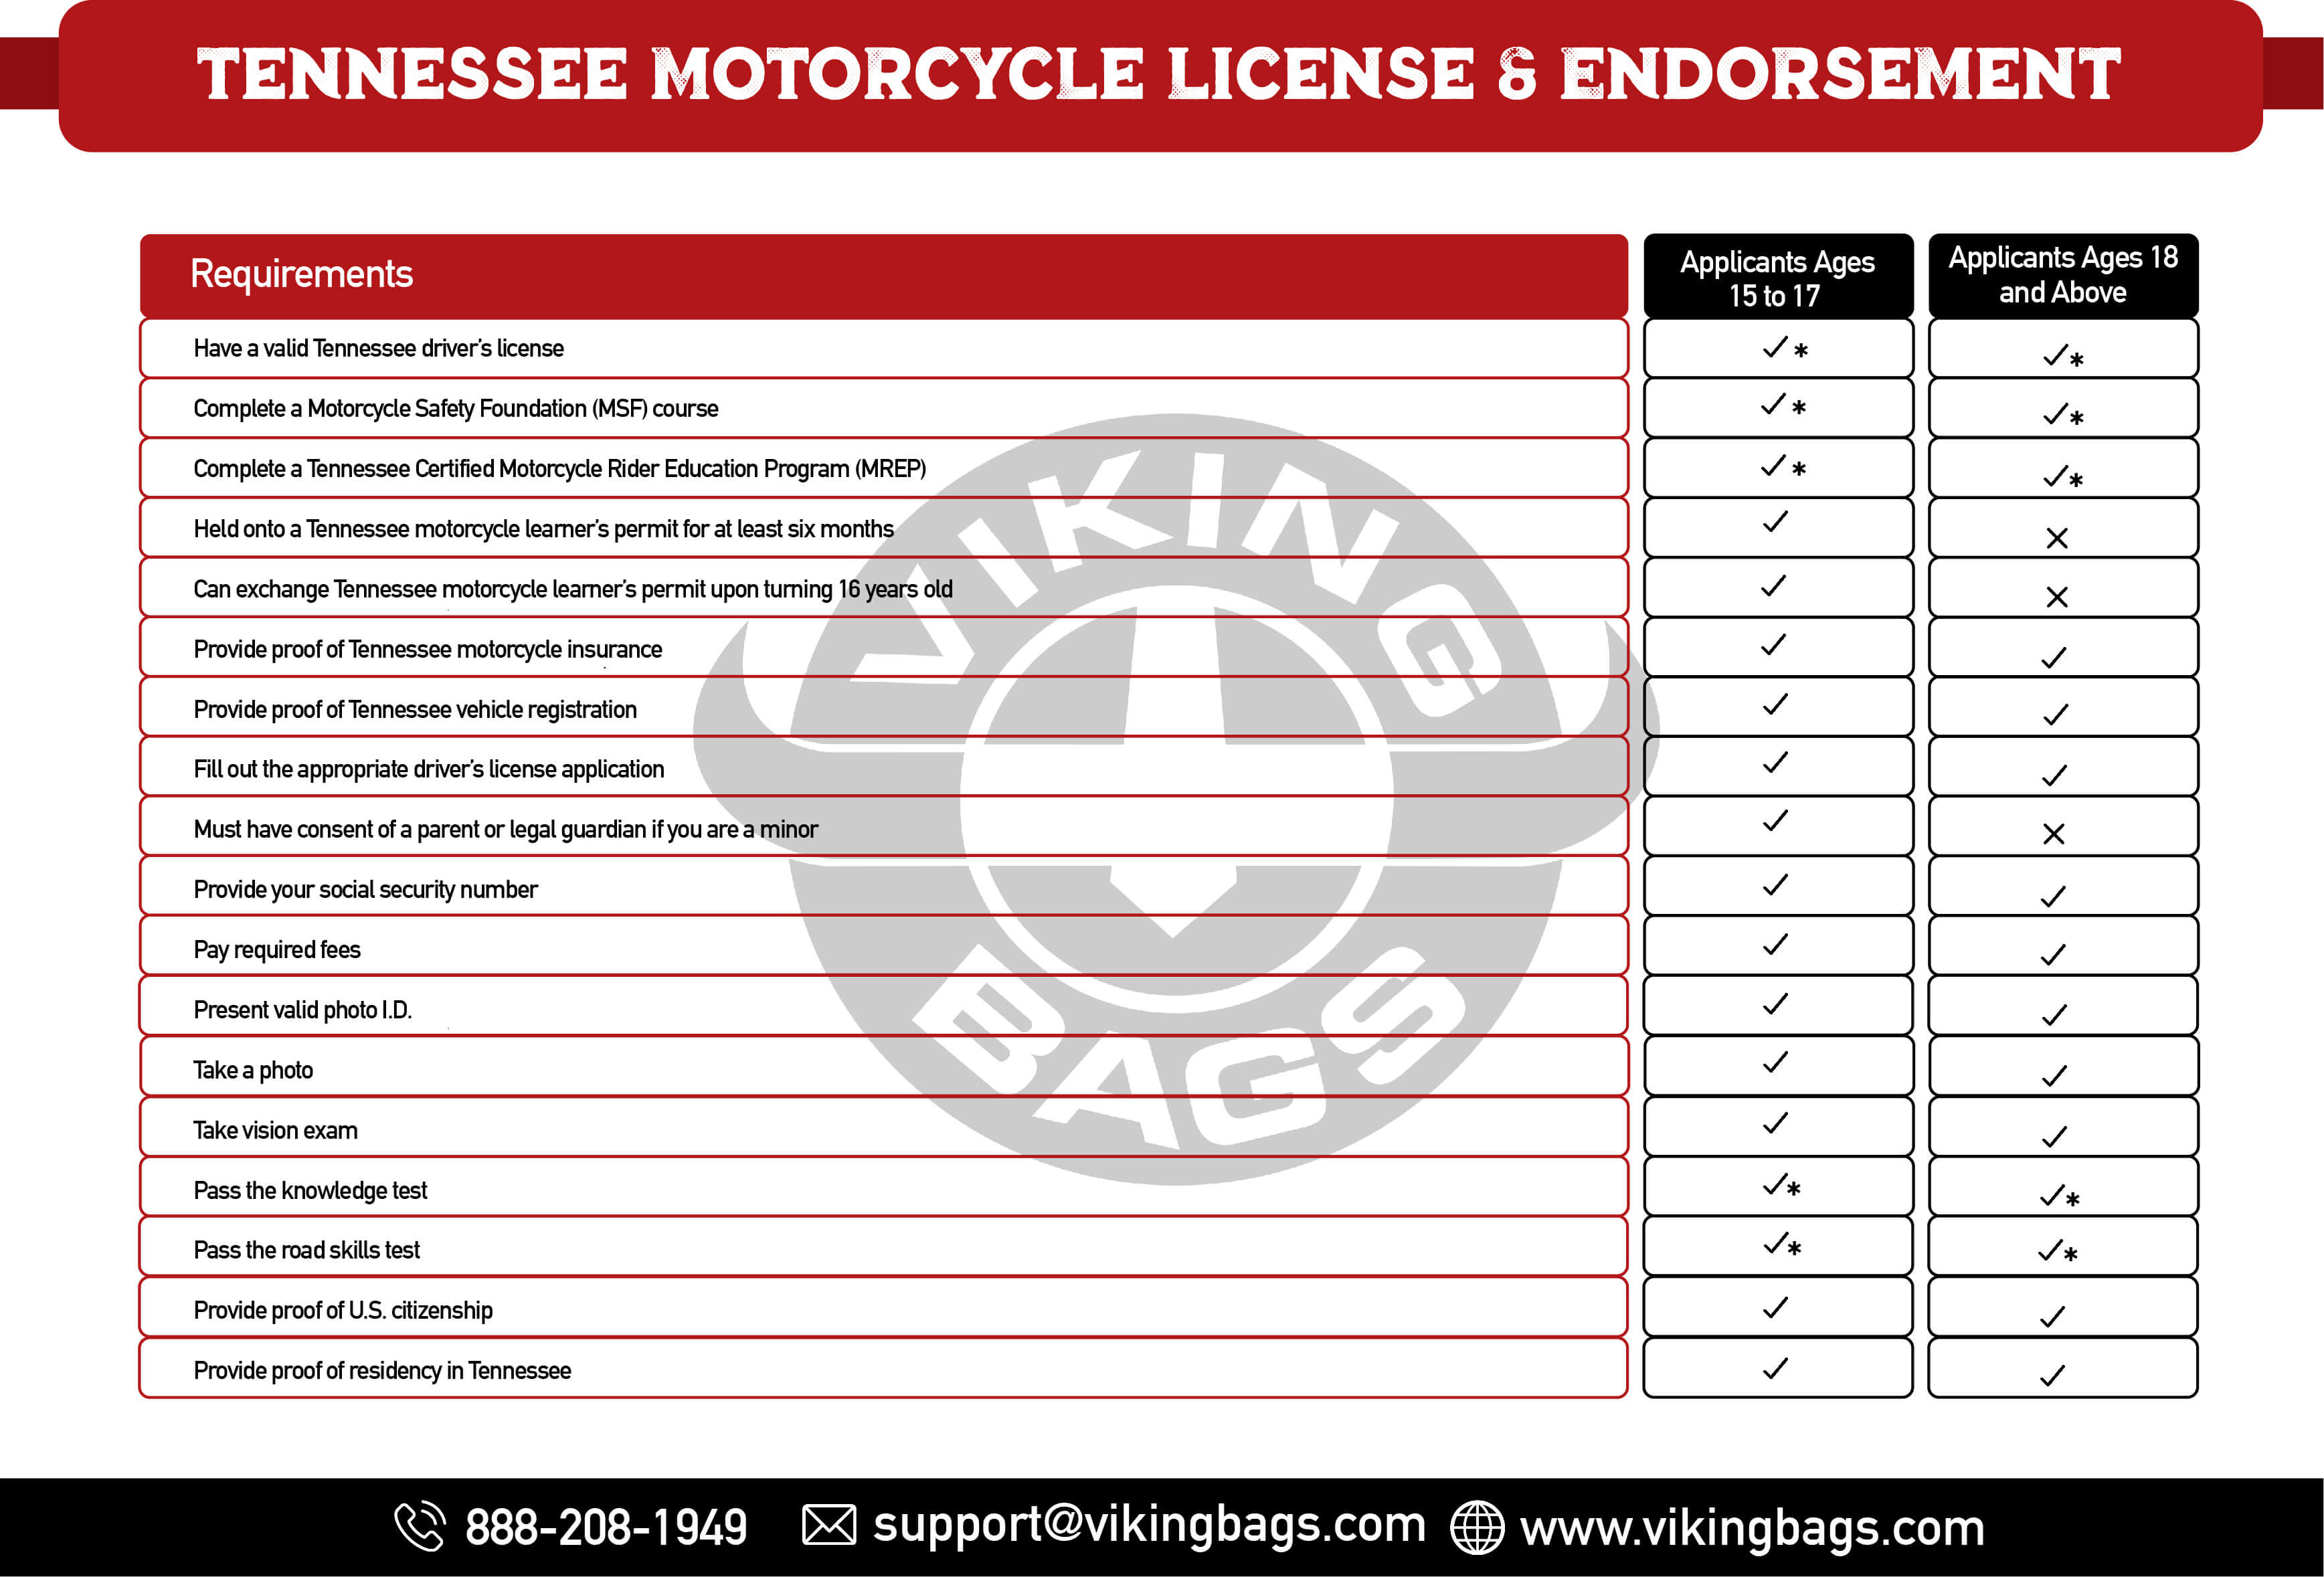 Tennessee Motorcycle License & Endorsement